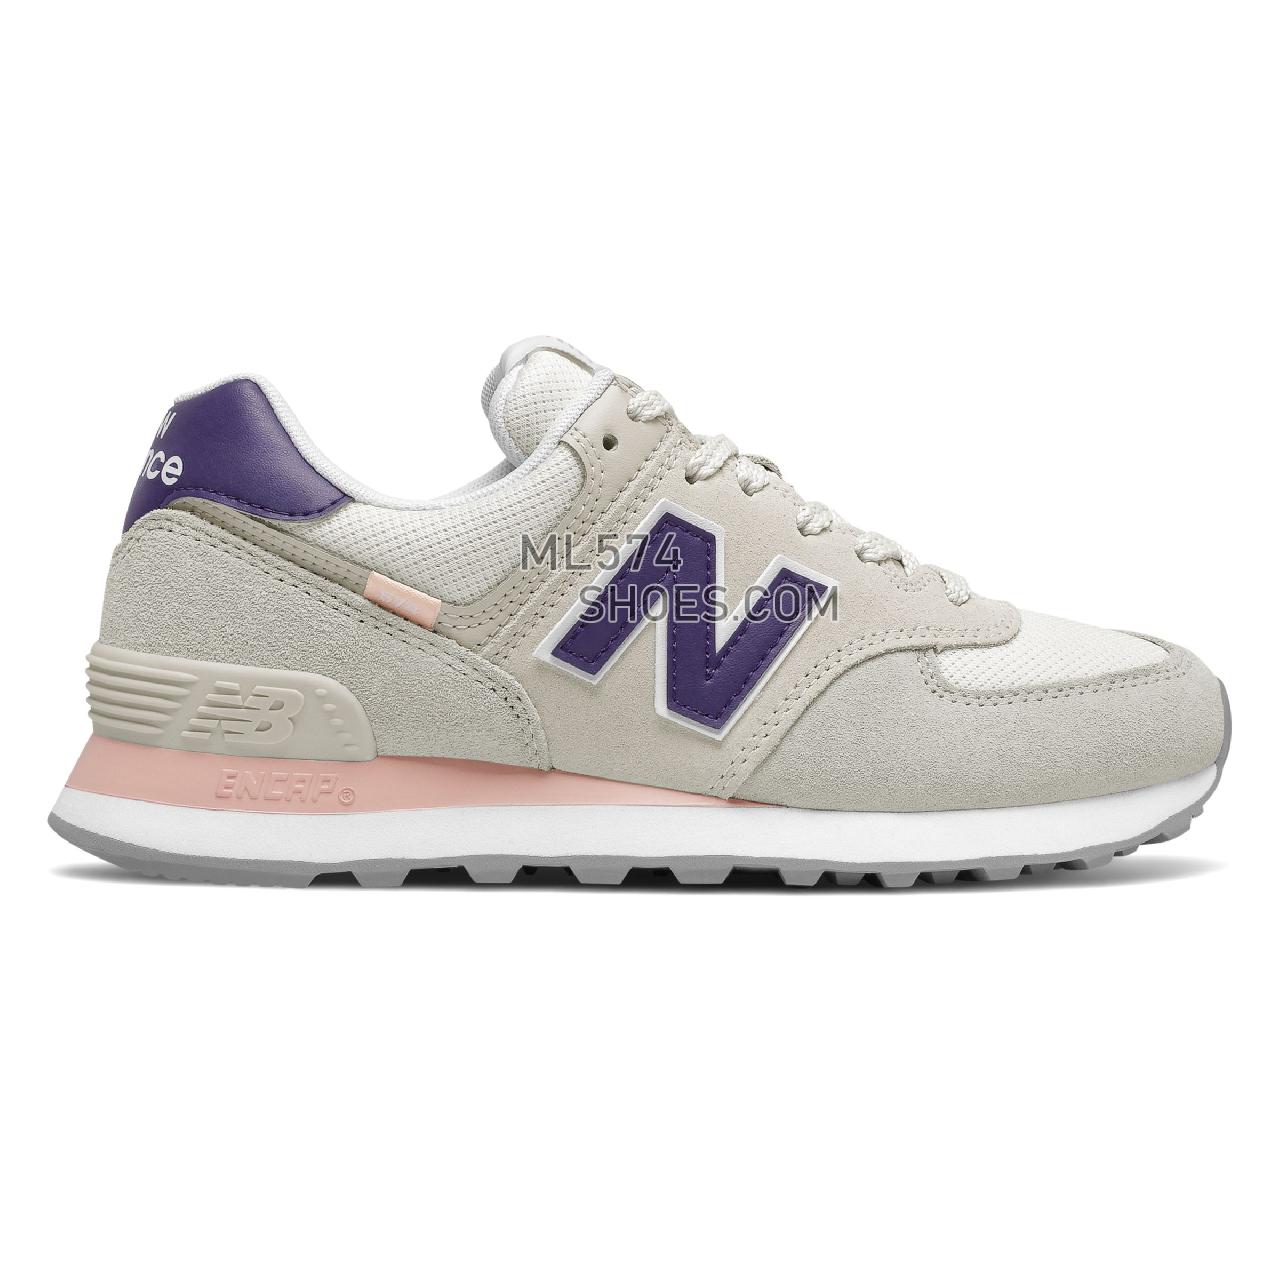 New Balance 574 - Women's Classic Sneakers - Timberwolf with Virtual Violet - WL574SM2